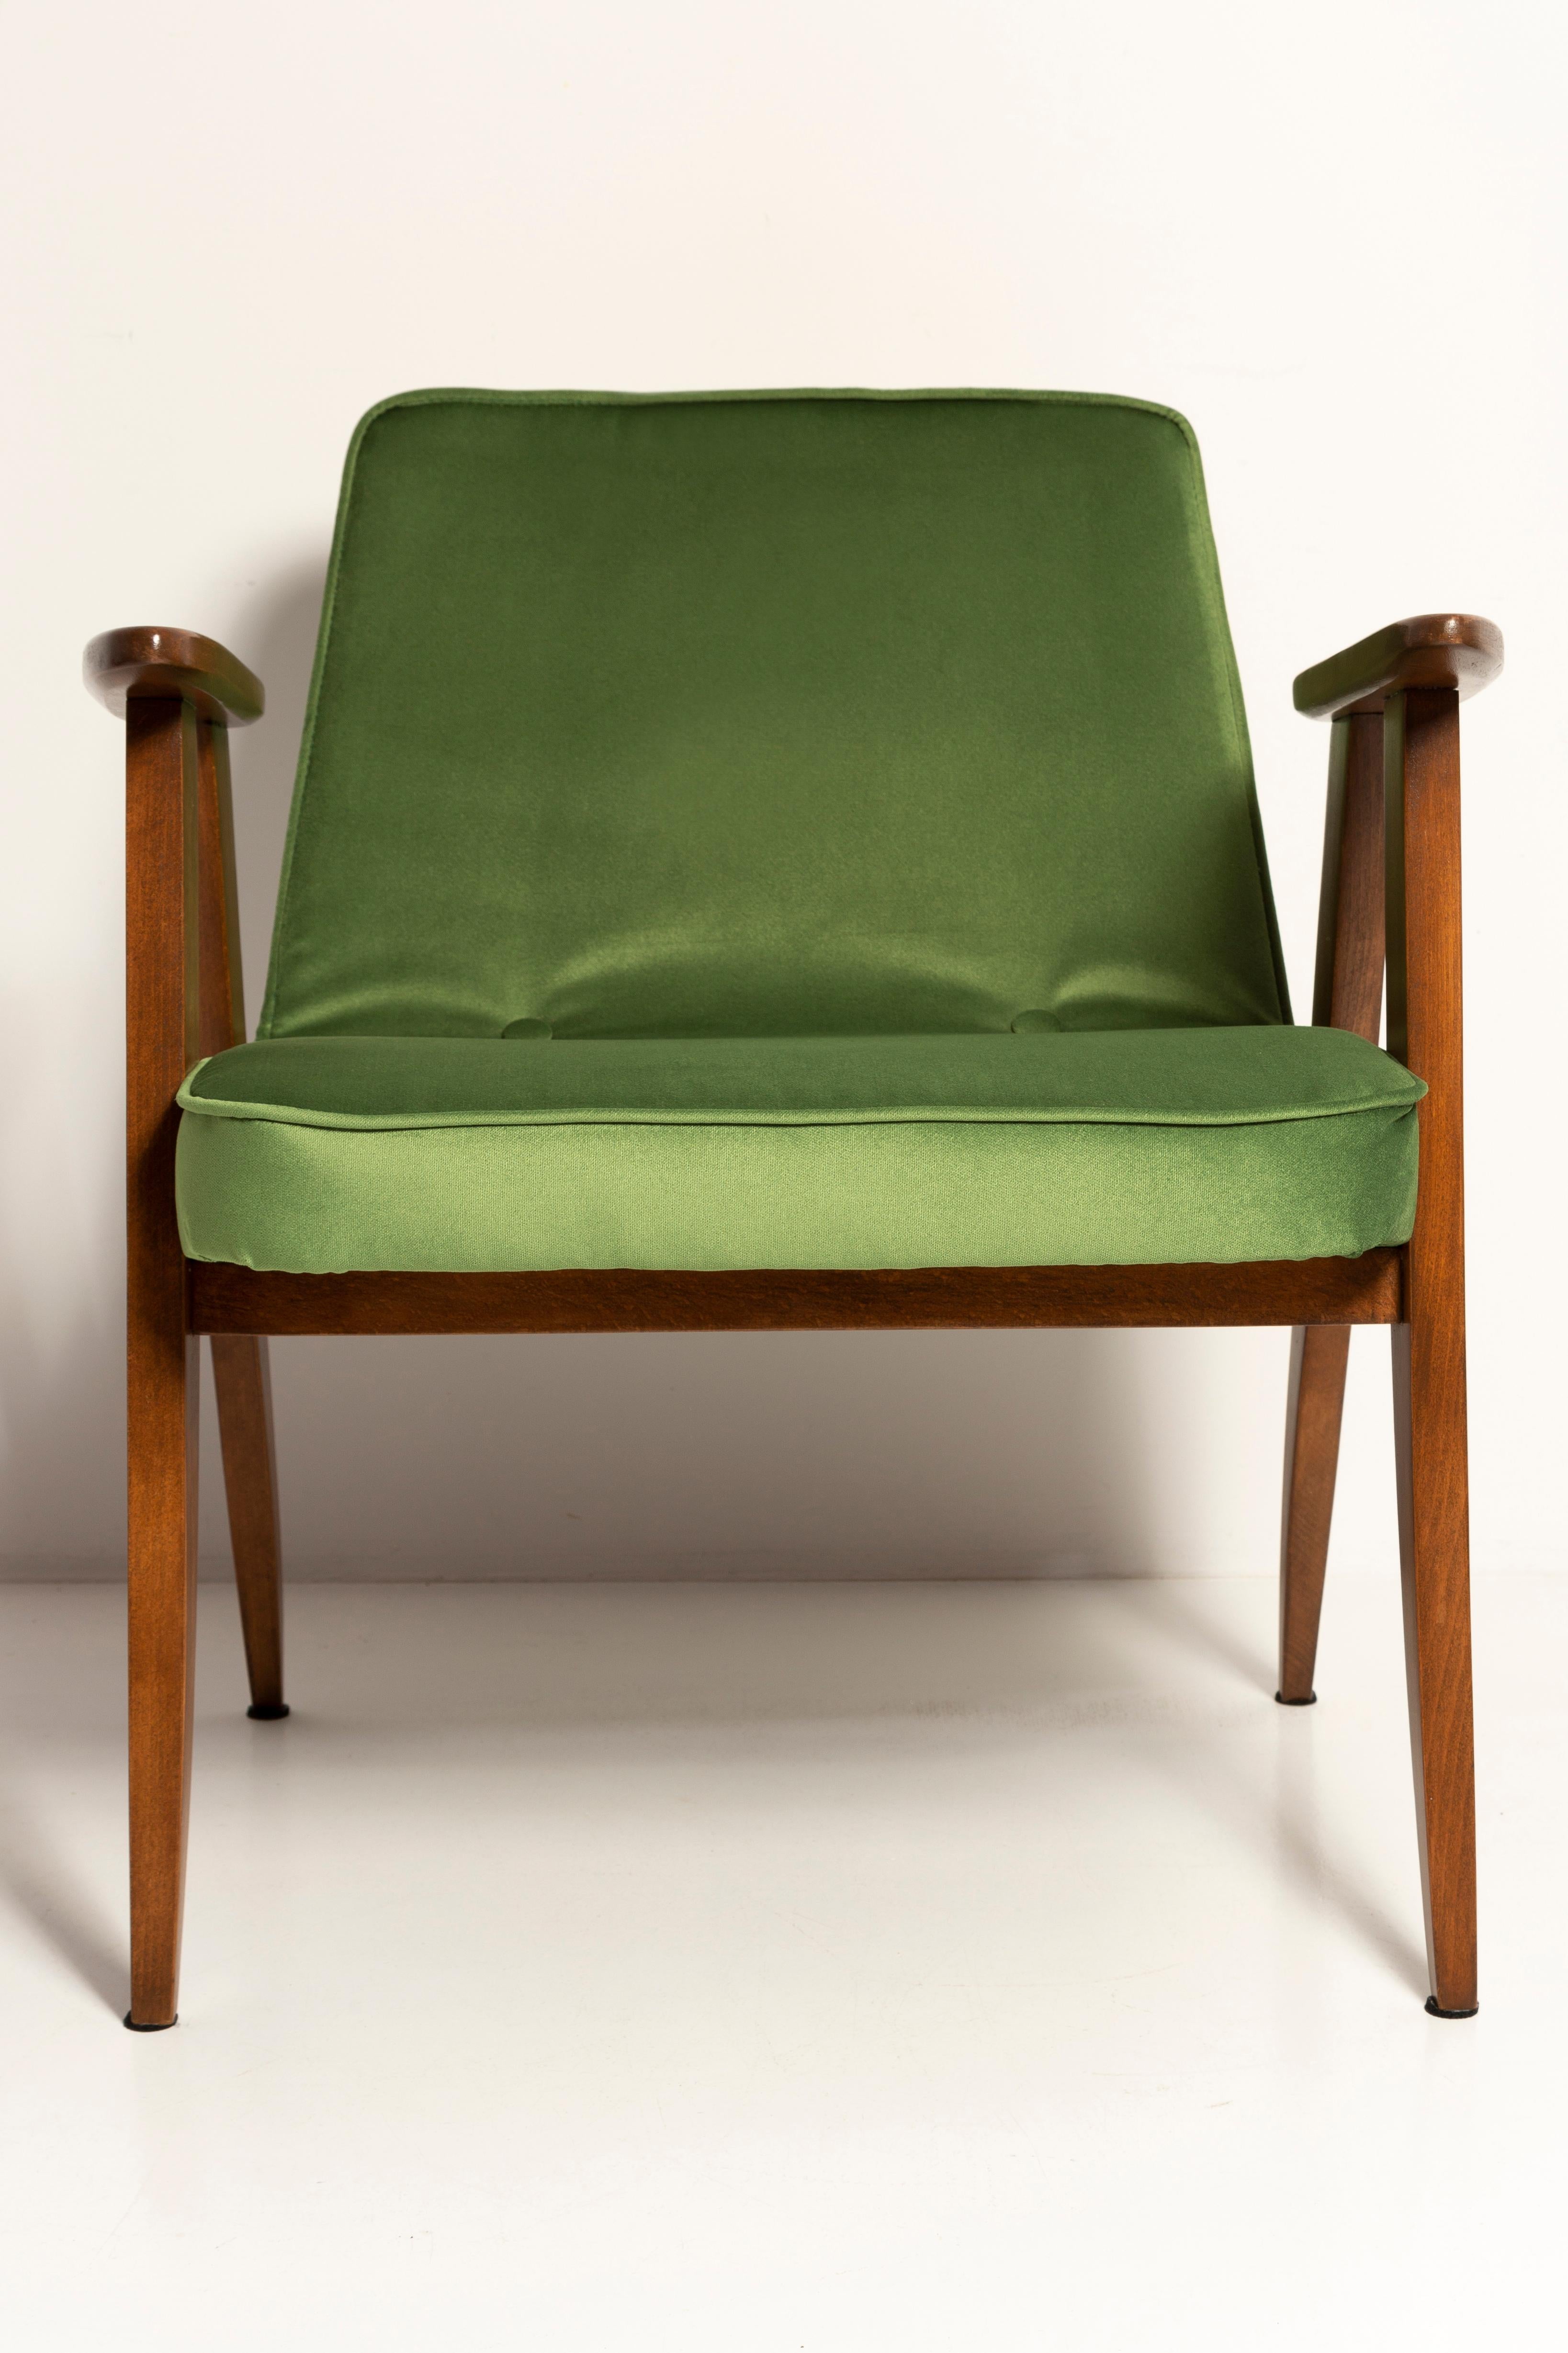 20th Century Pair of Mid-Century 366 Armchairs, Green and Orange, by Chierowski Europe, 1960s For Sale